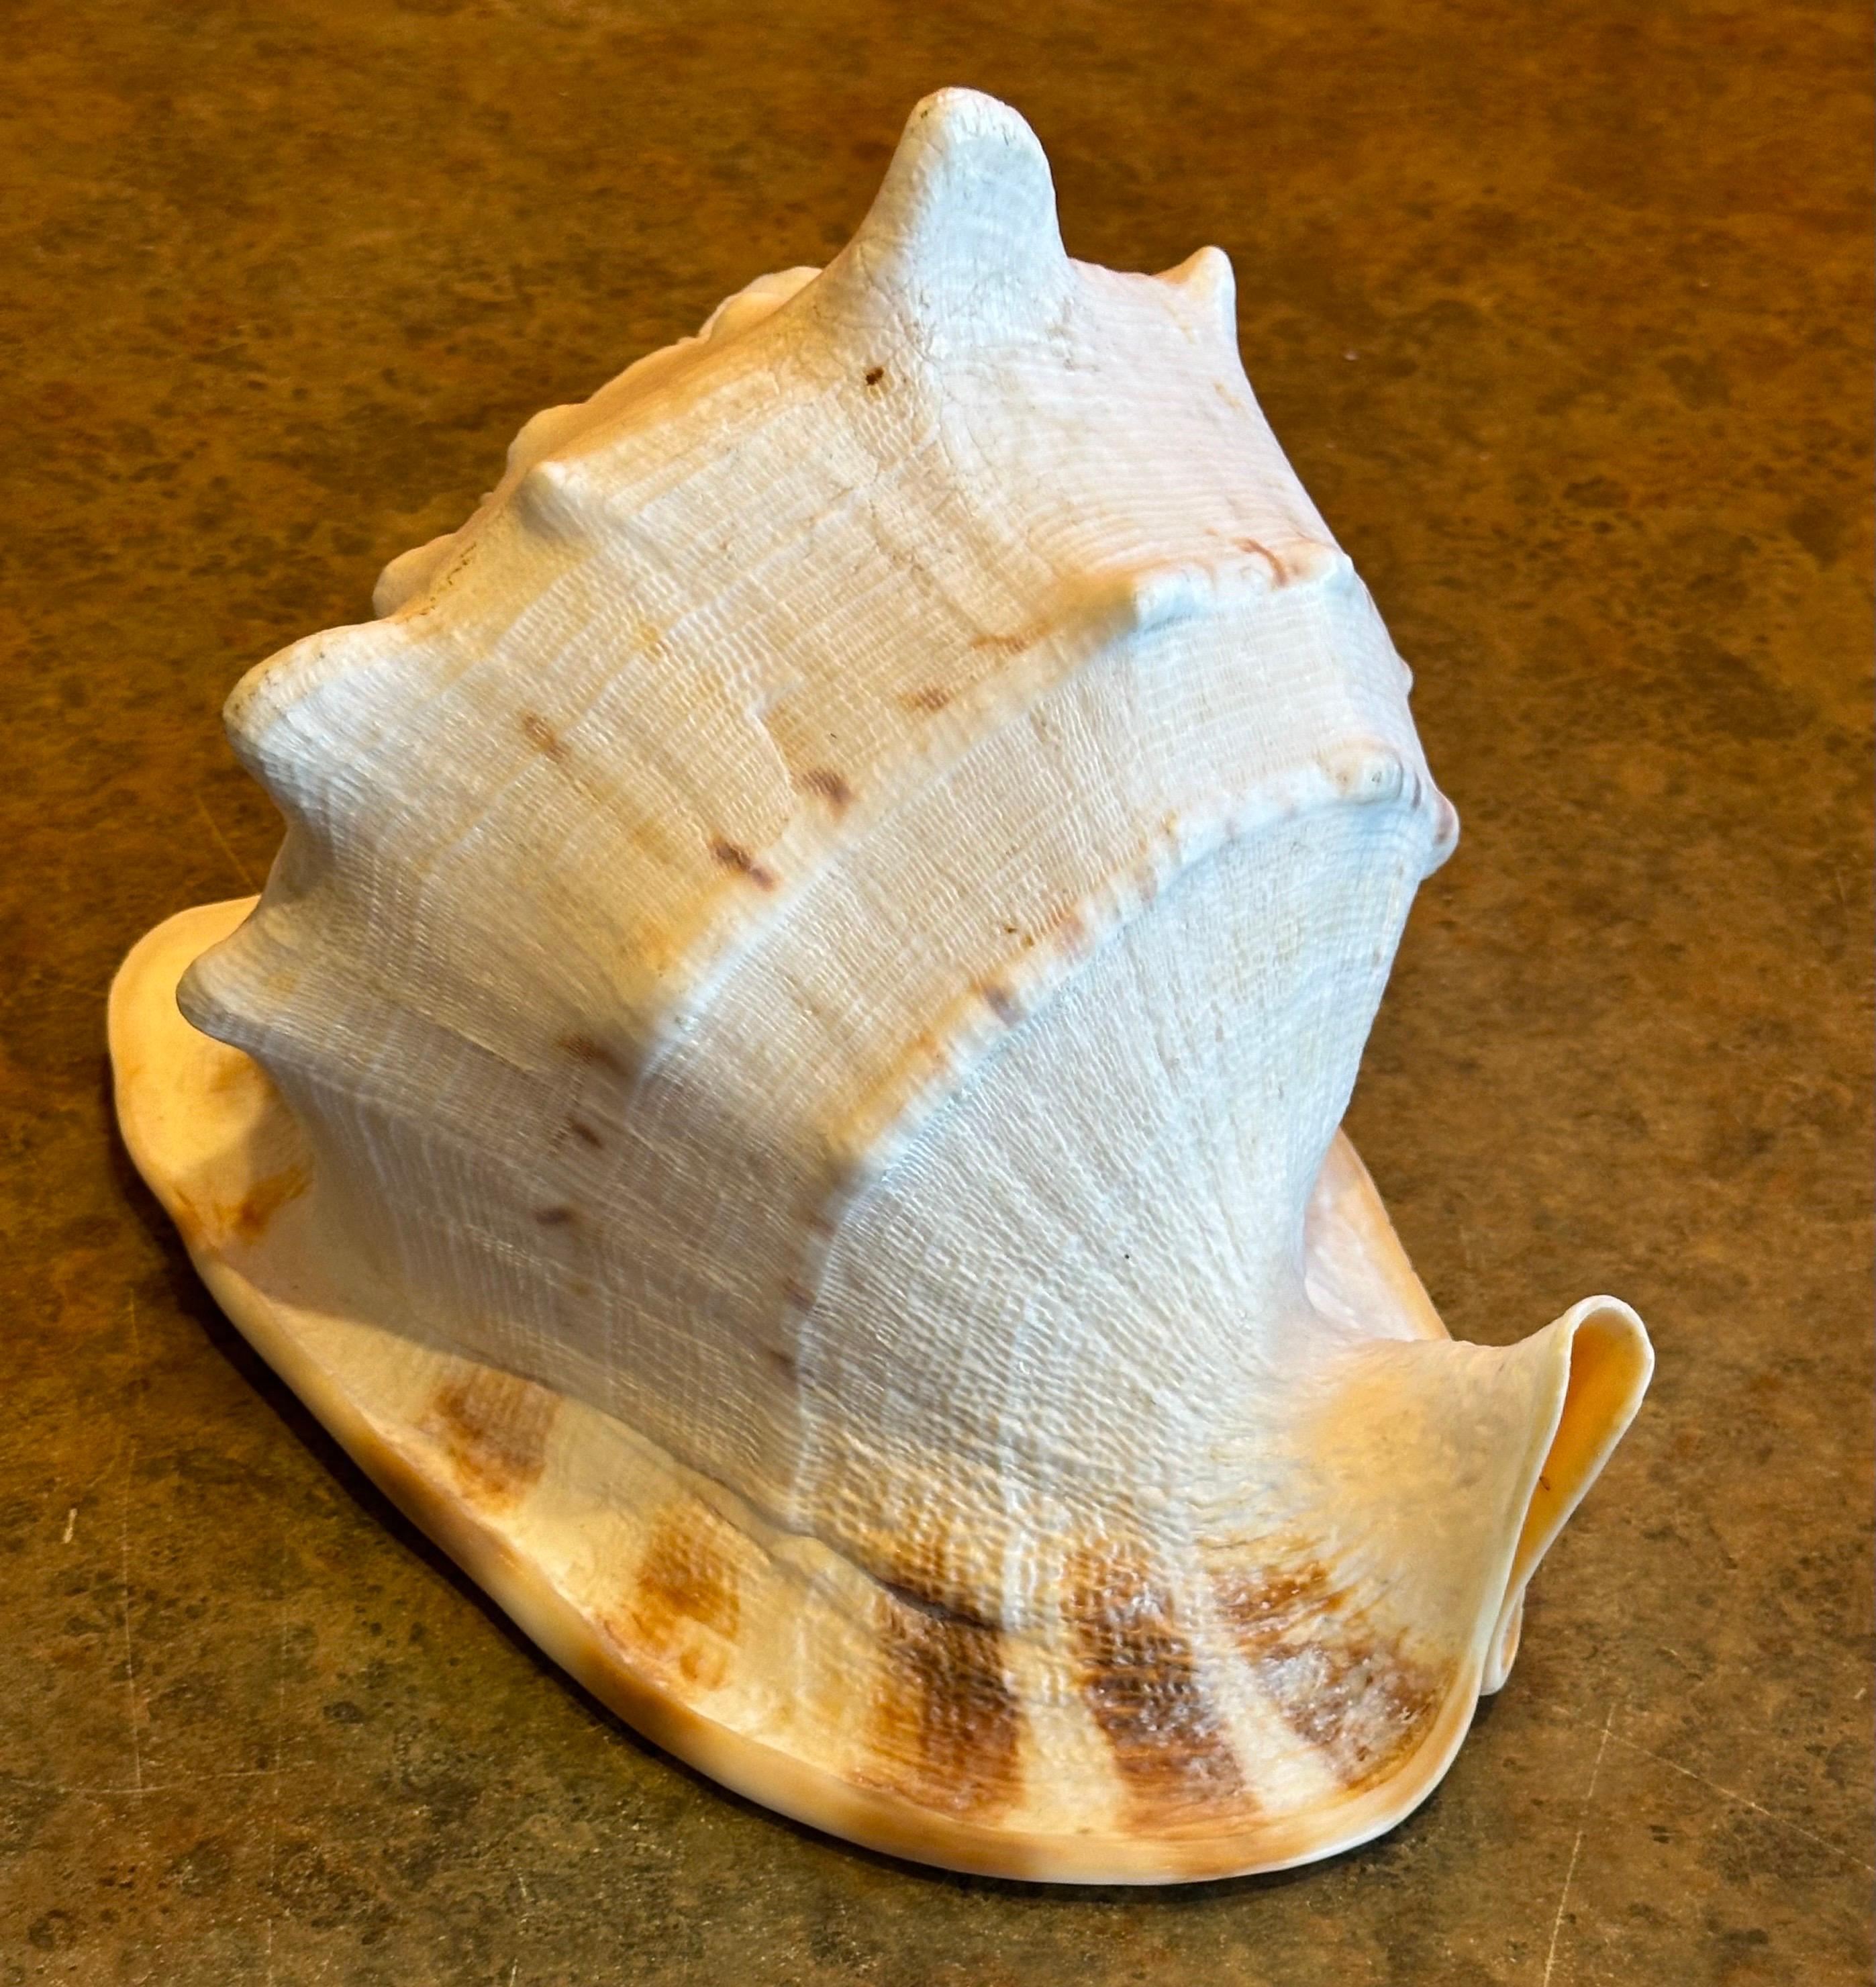 how much are conch shells worth